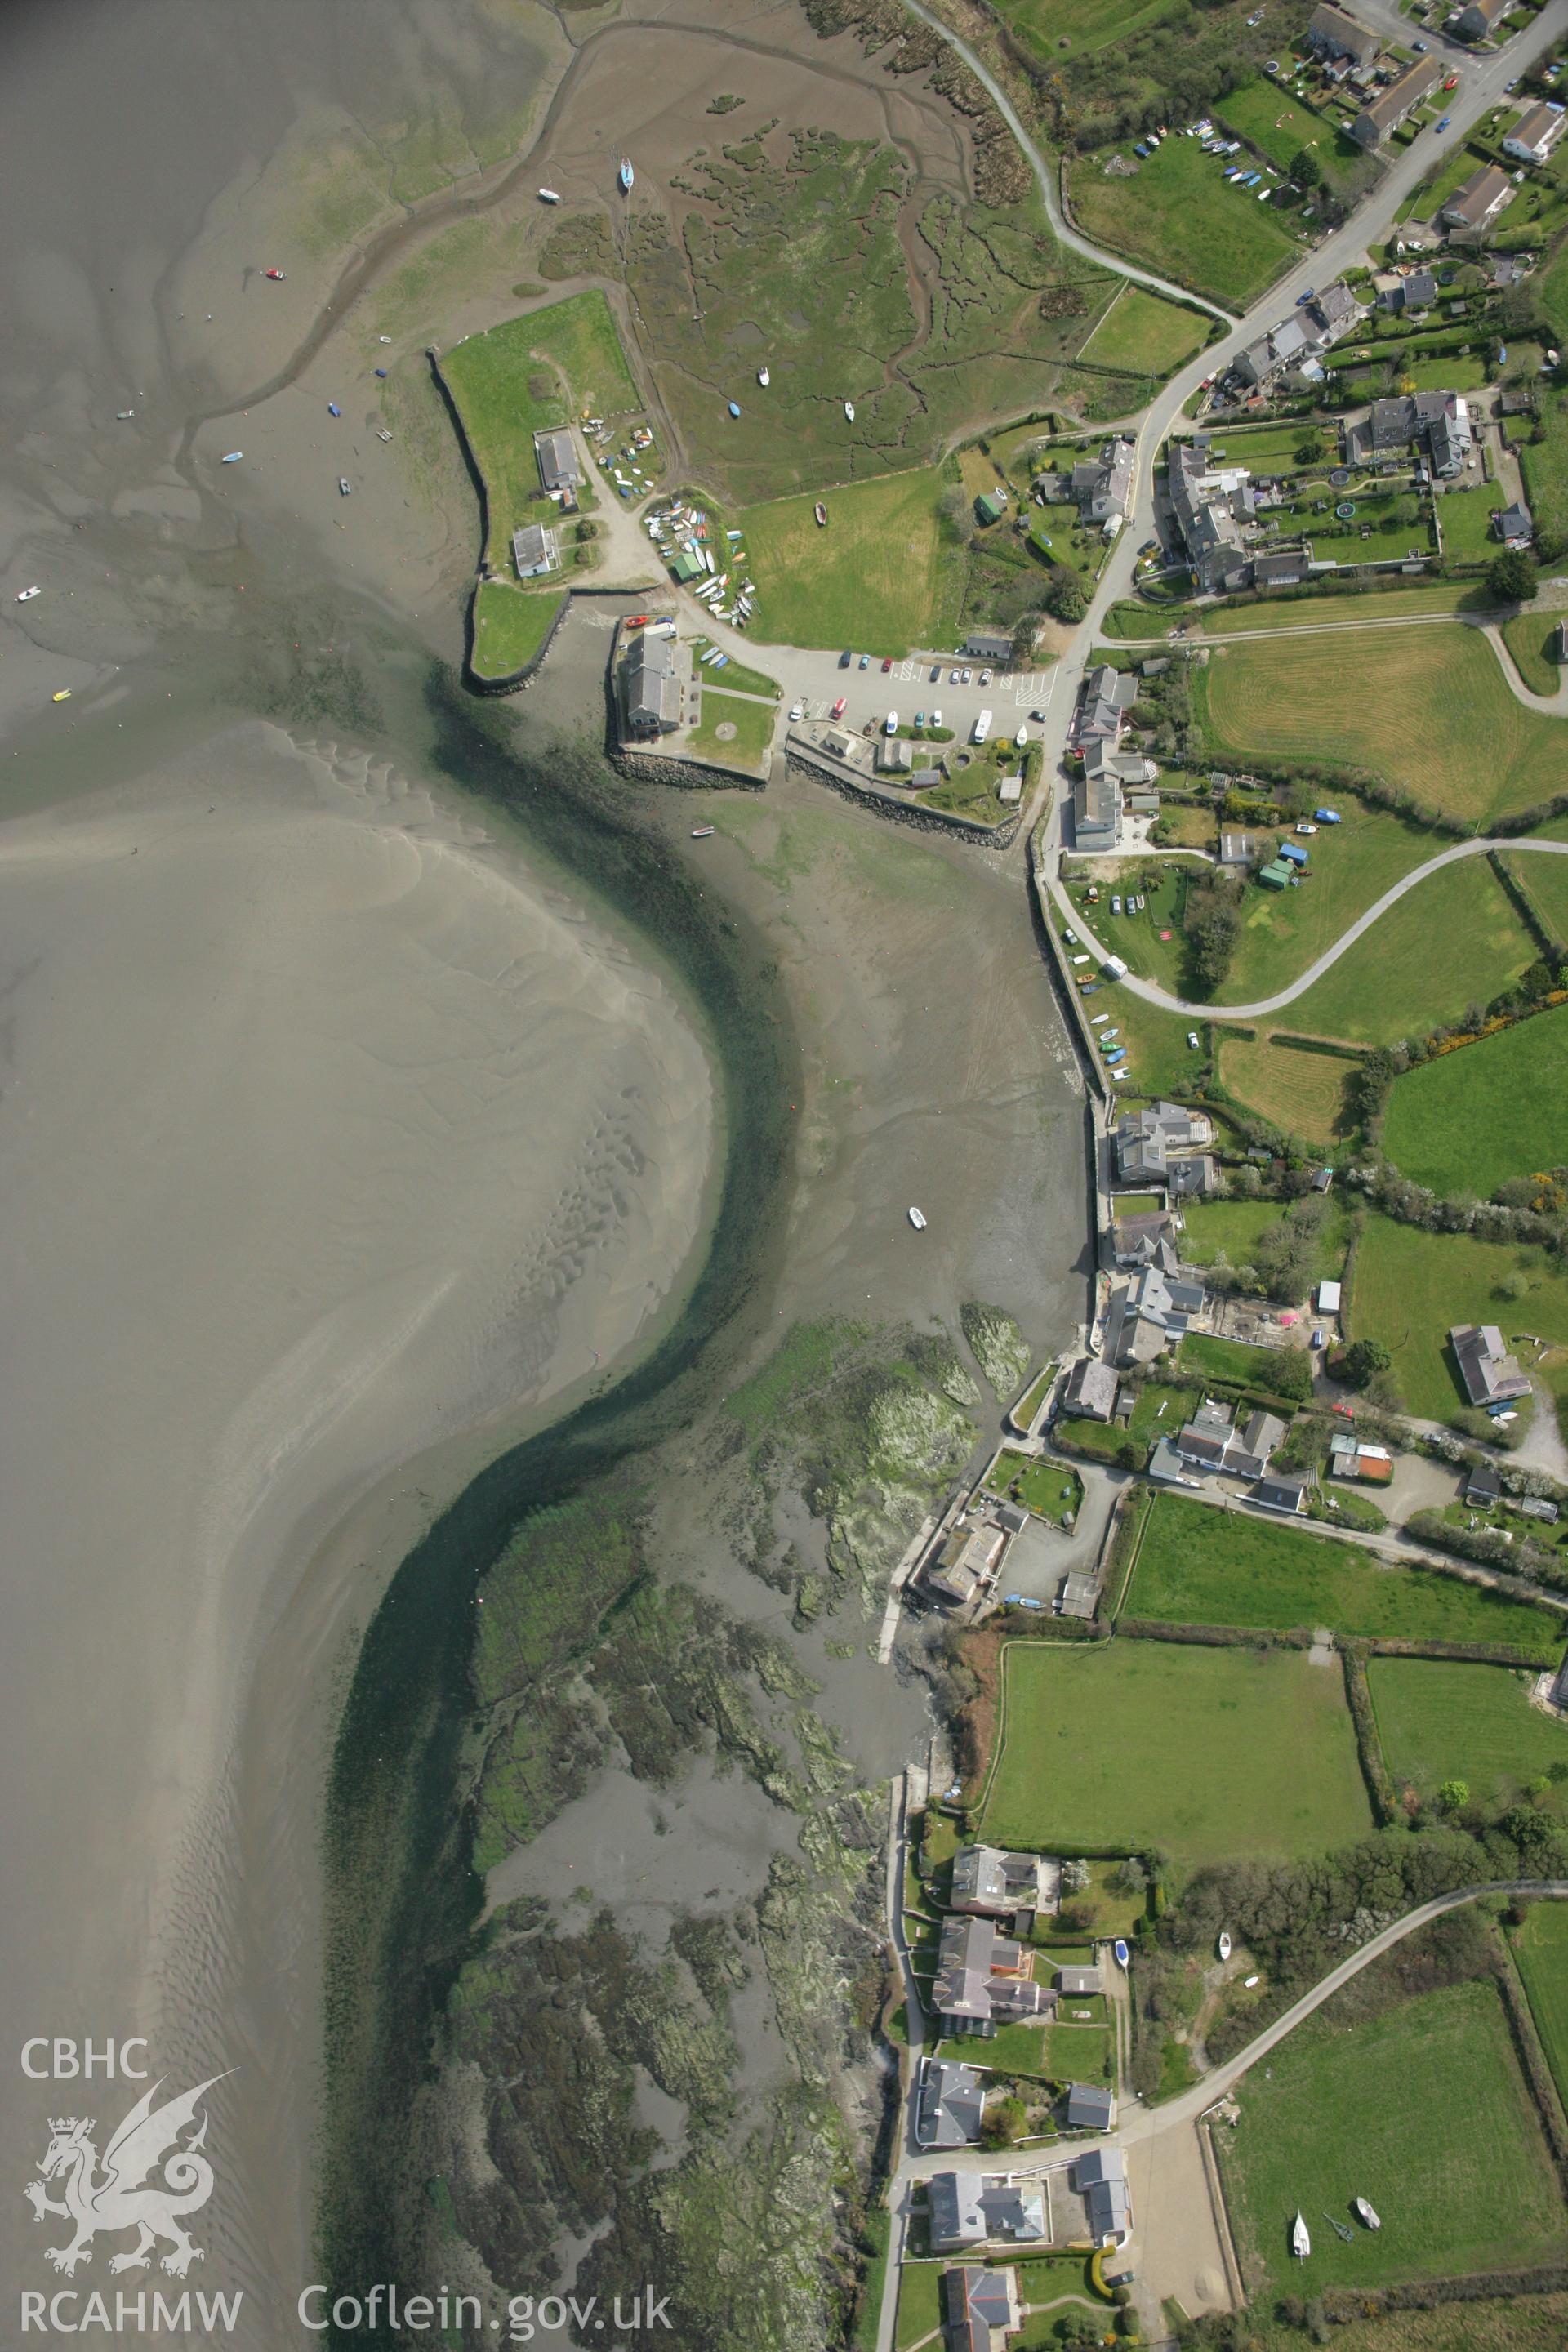 RCAHMW colour oblique aerial photograph of Newport Parog, showing view of harbour. Taken on 17 April 2007 by Toby Driver